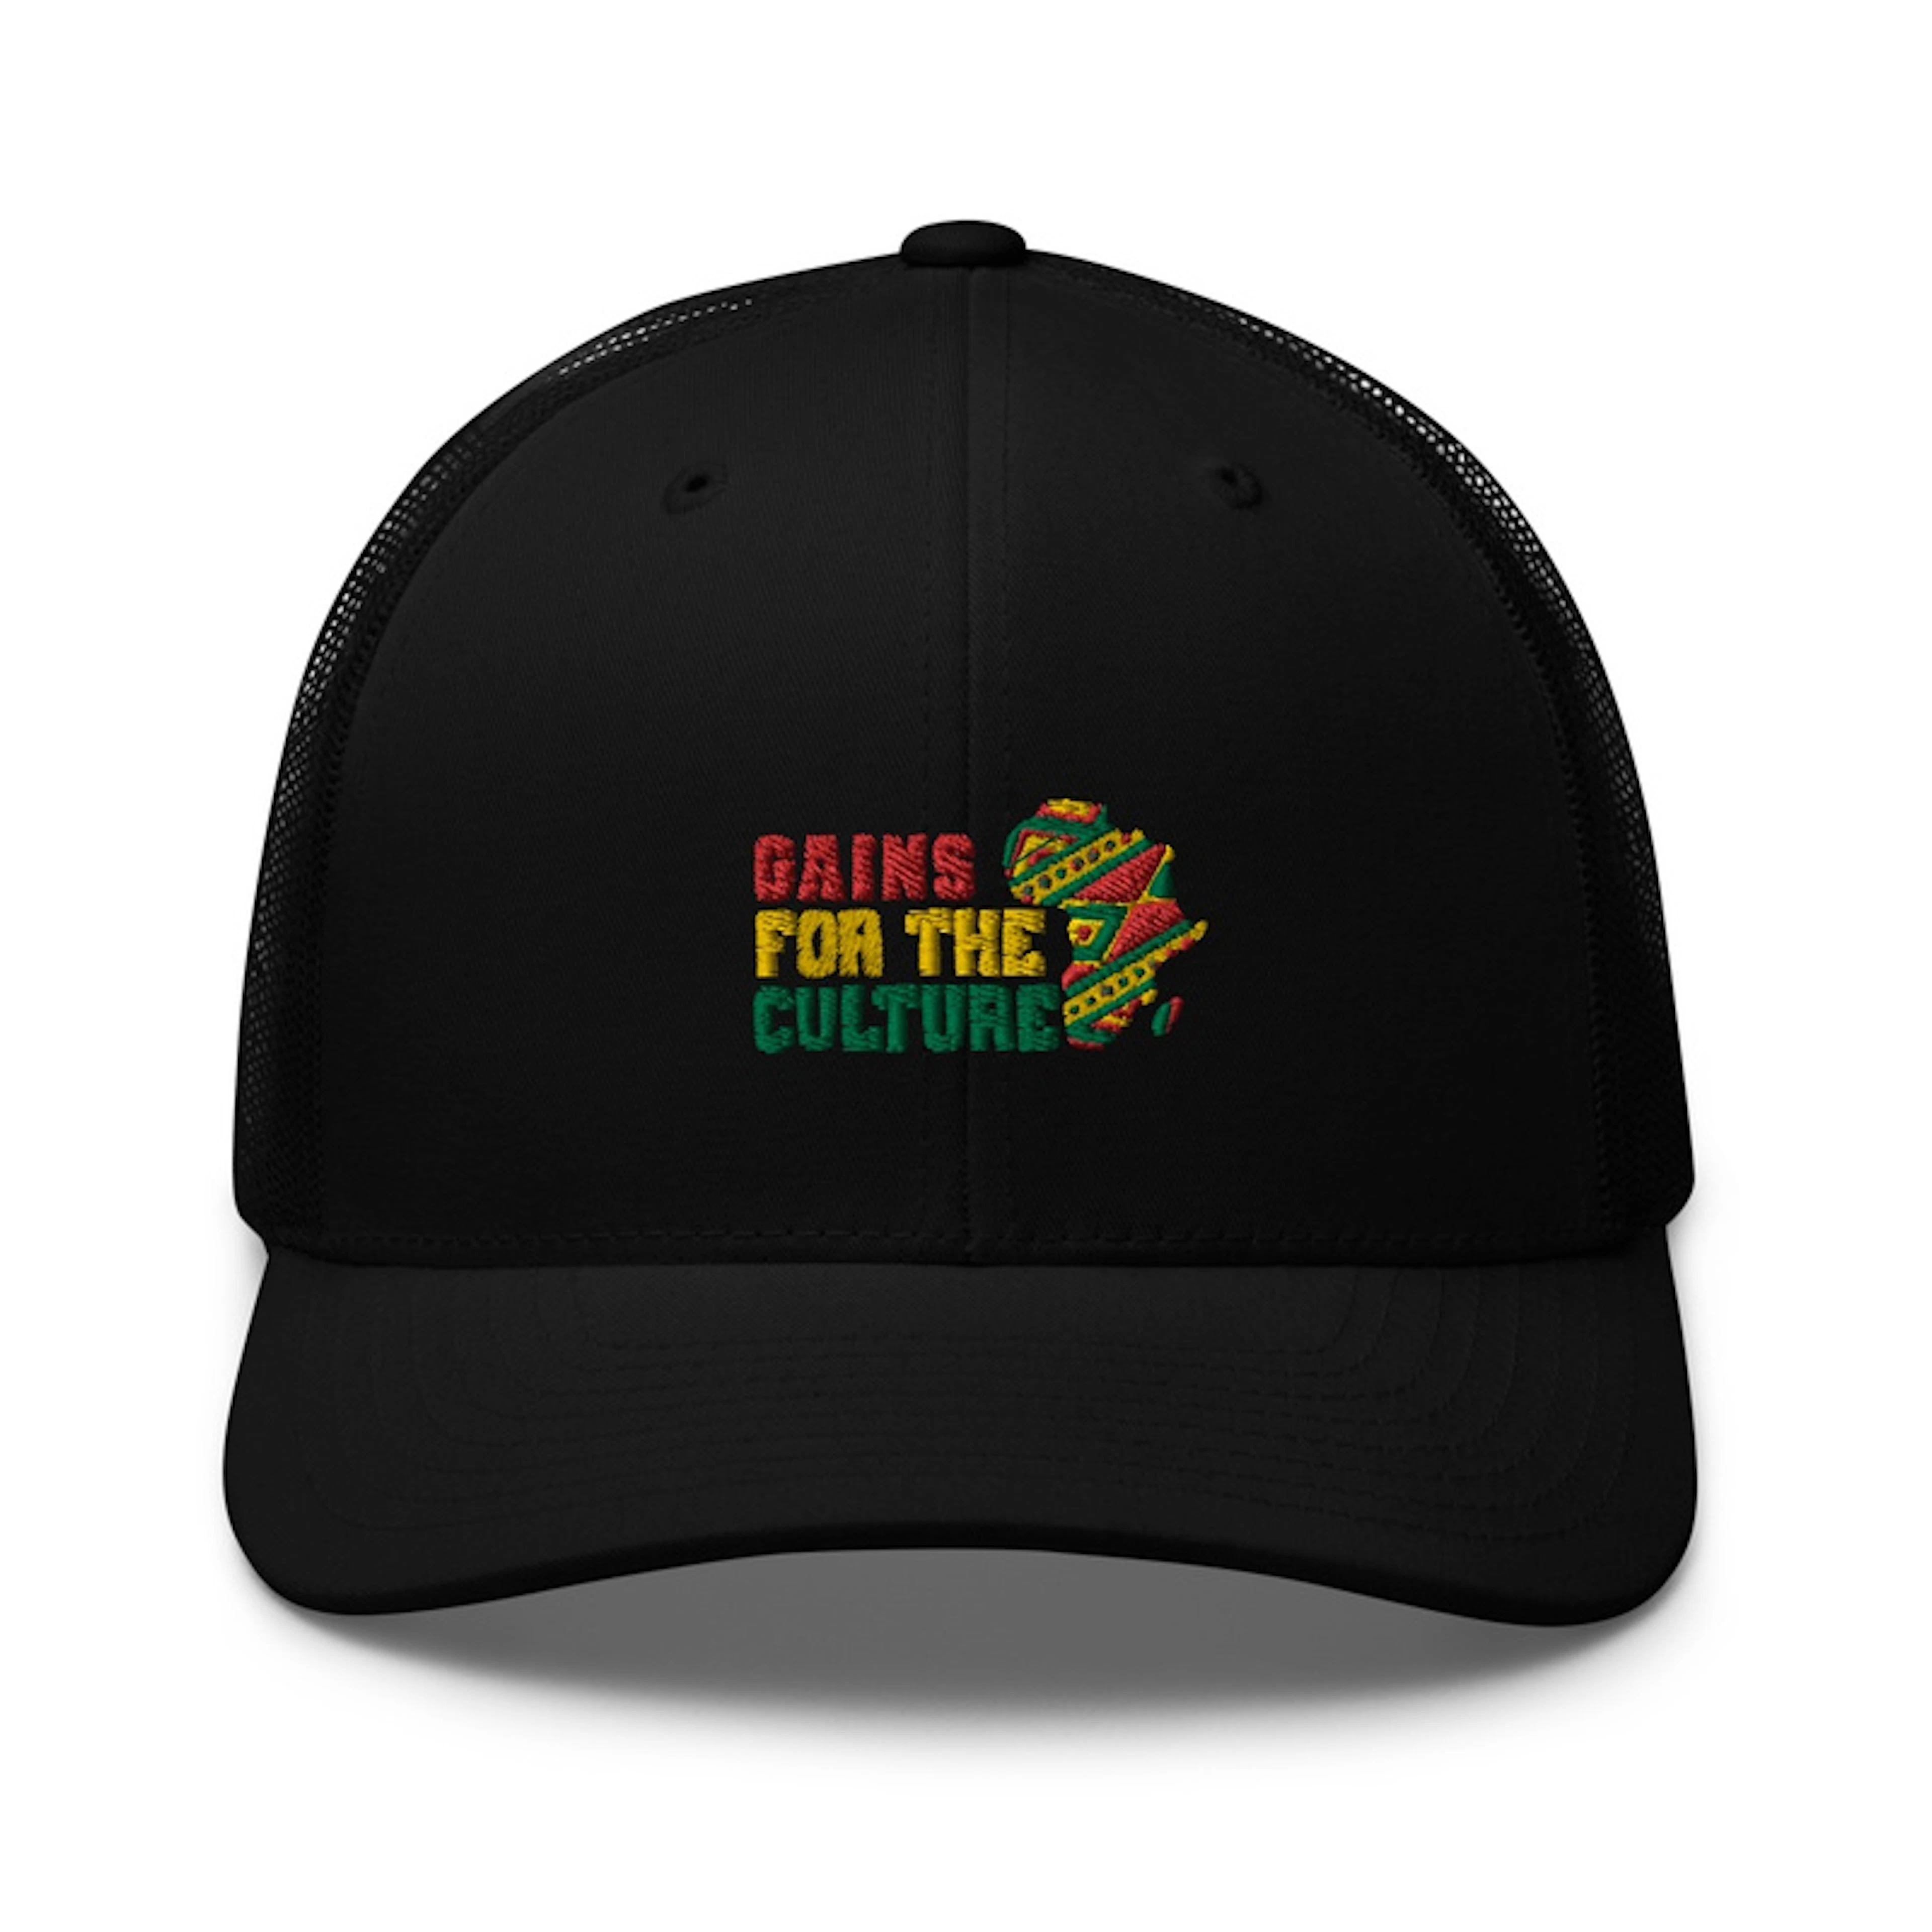 Gains For The Culture Trucker hat